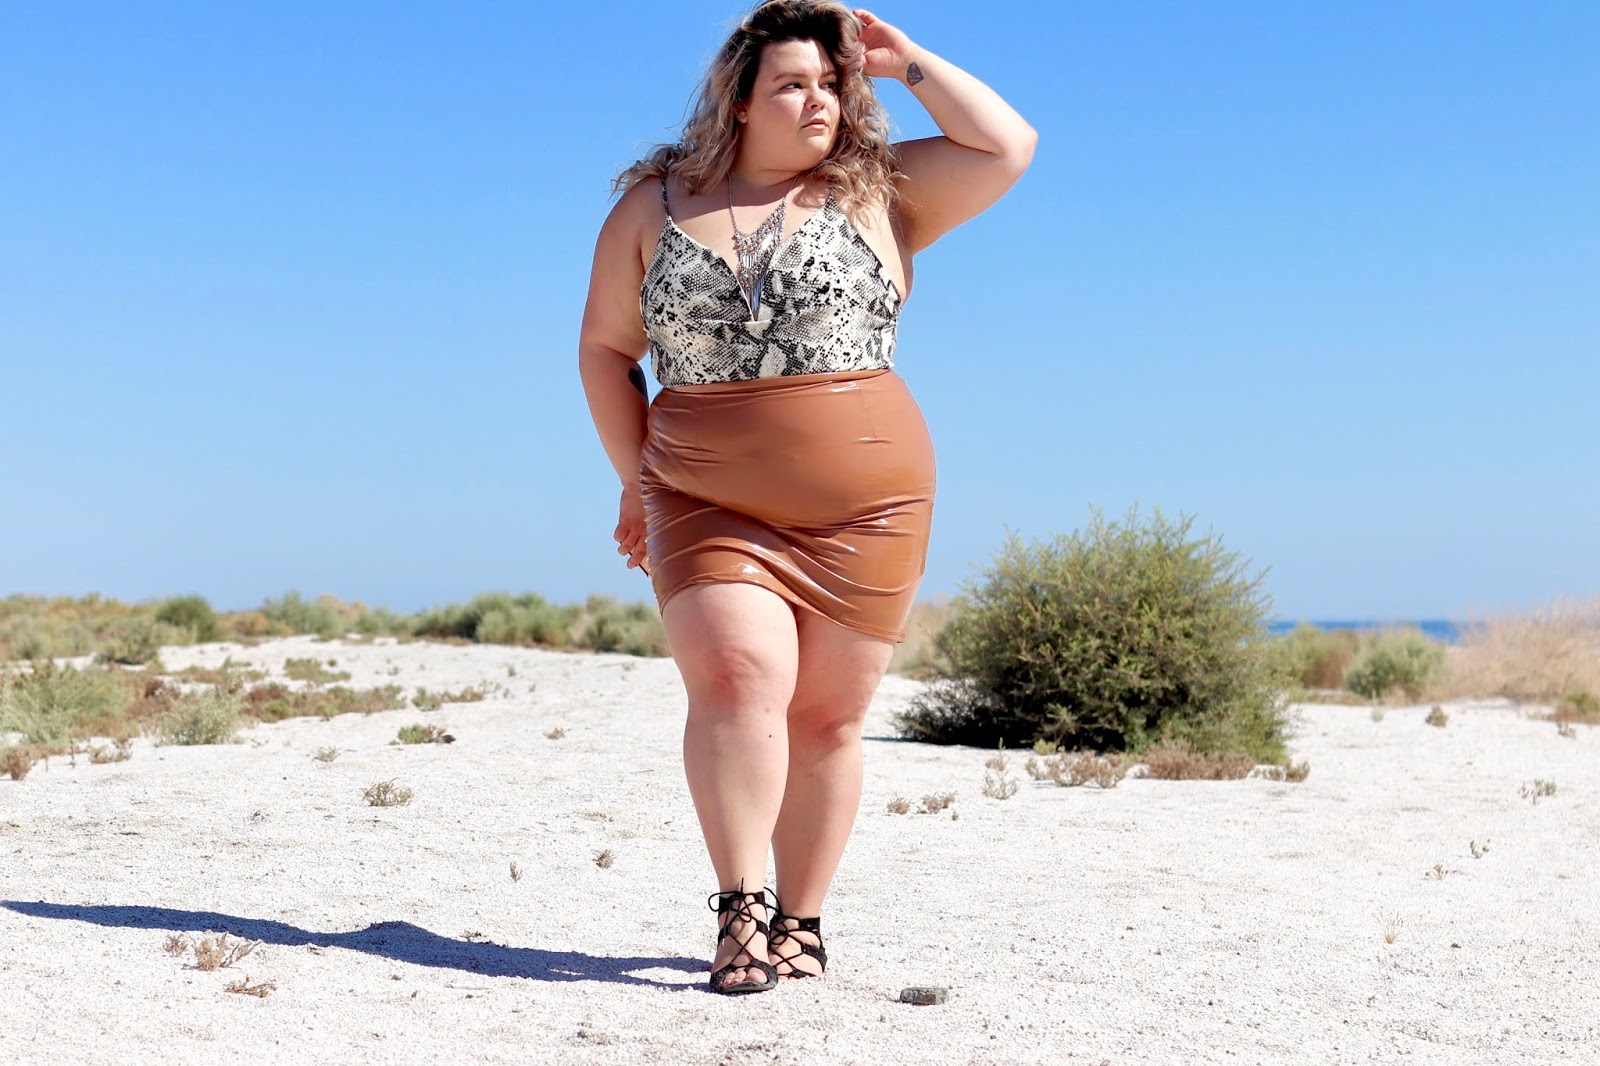 Chicago Plus Size Petite Fashion Blogger, YouTuber, and model Natalie Craig, of Natalie in the City, reviews Fashion Nova Curve's Slither My Way Bodysuit and Boot Camp Latex Skirt.